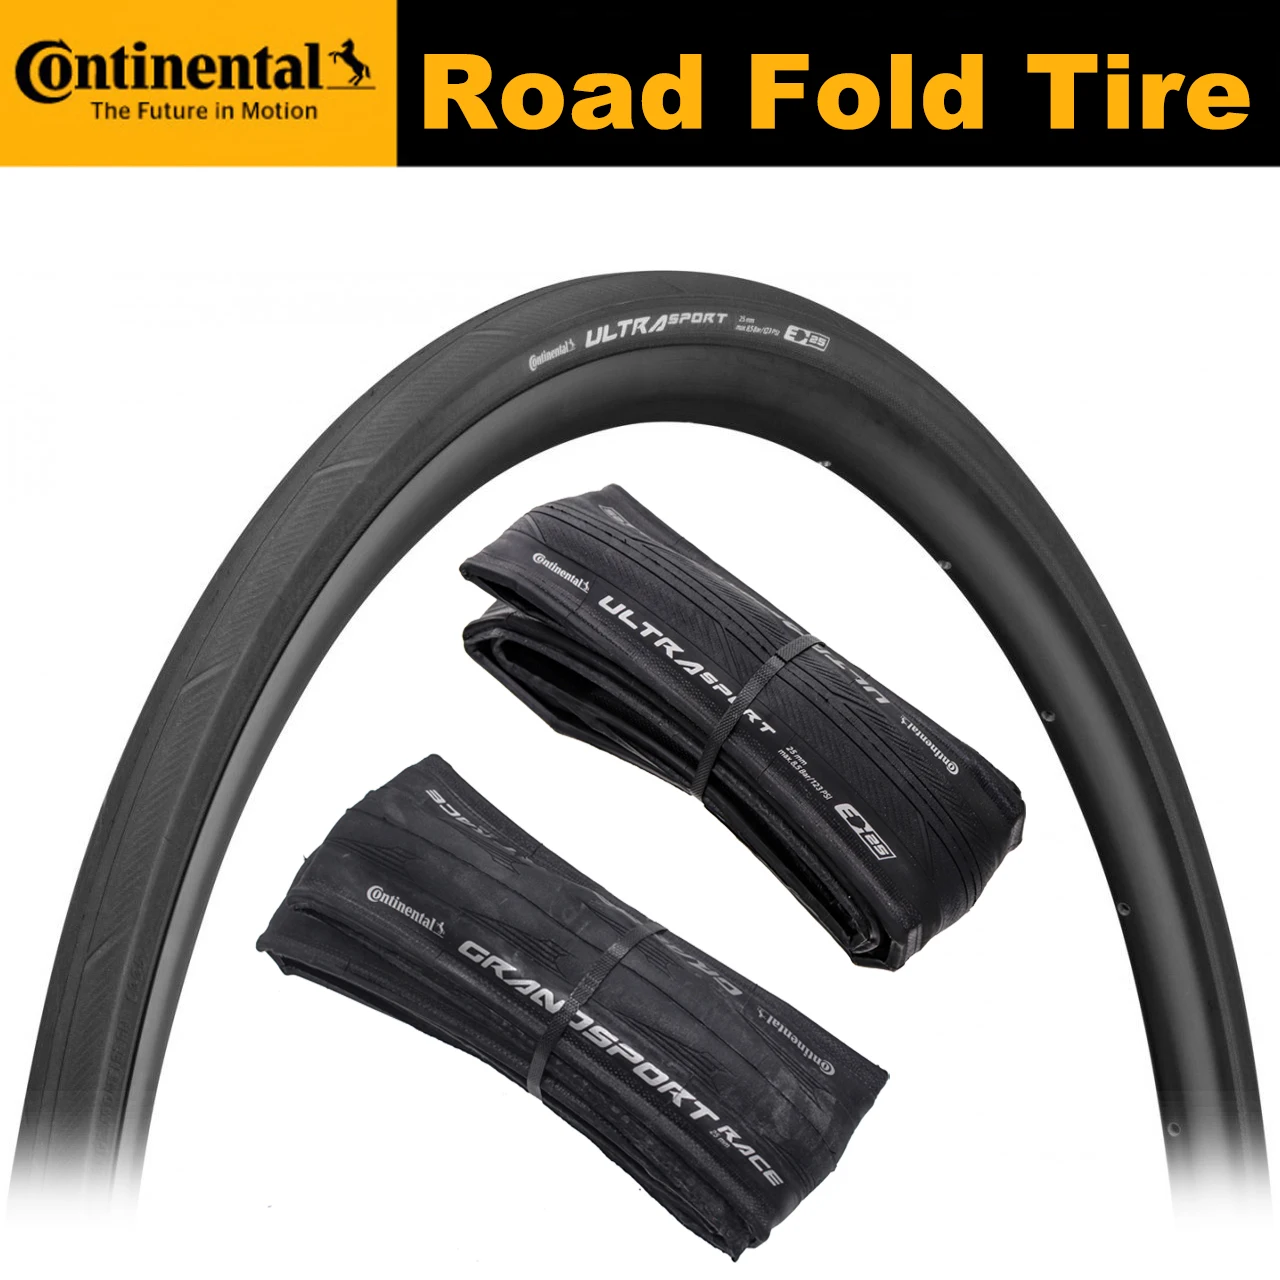  Continental Grand Sport Race All Rounder Bicycle 700x25  NyTechBreaker Folding Clincher - Pair (2 Tires) : Sports & Outdoors